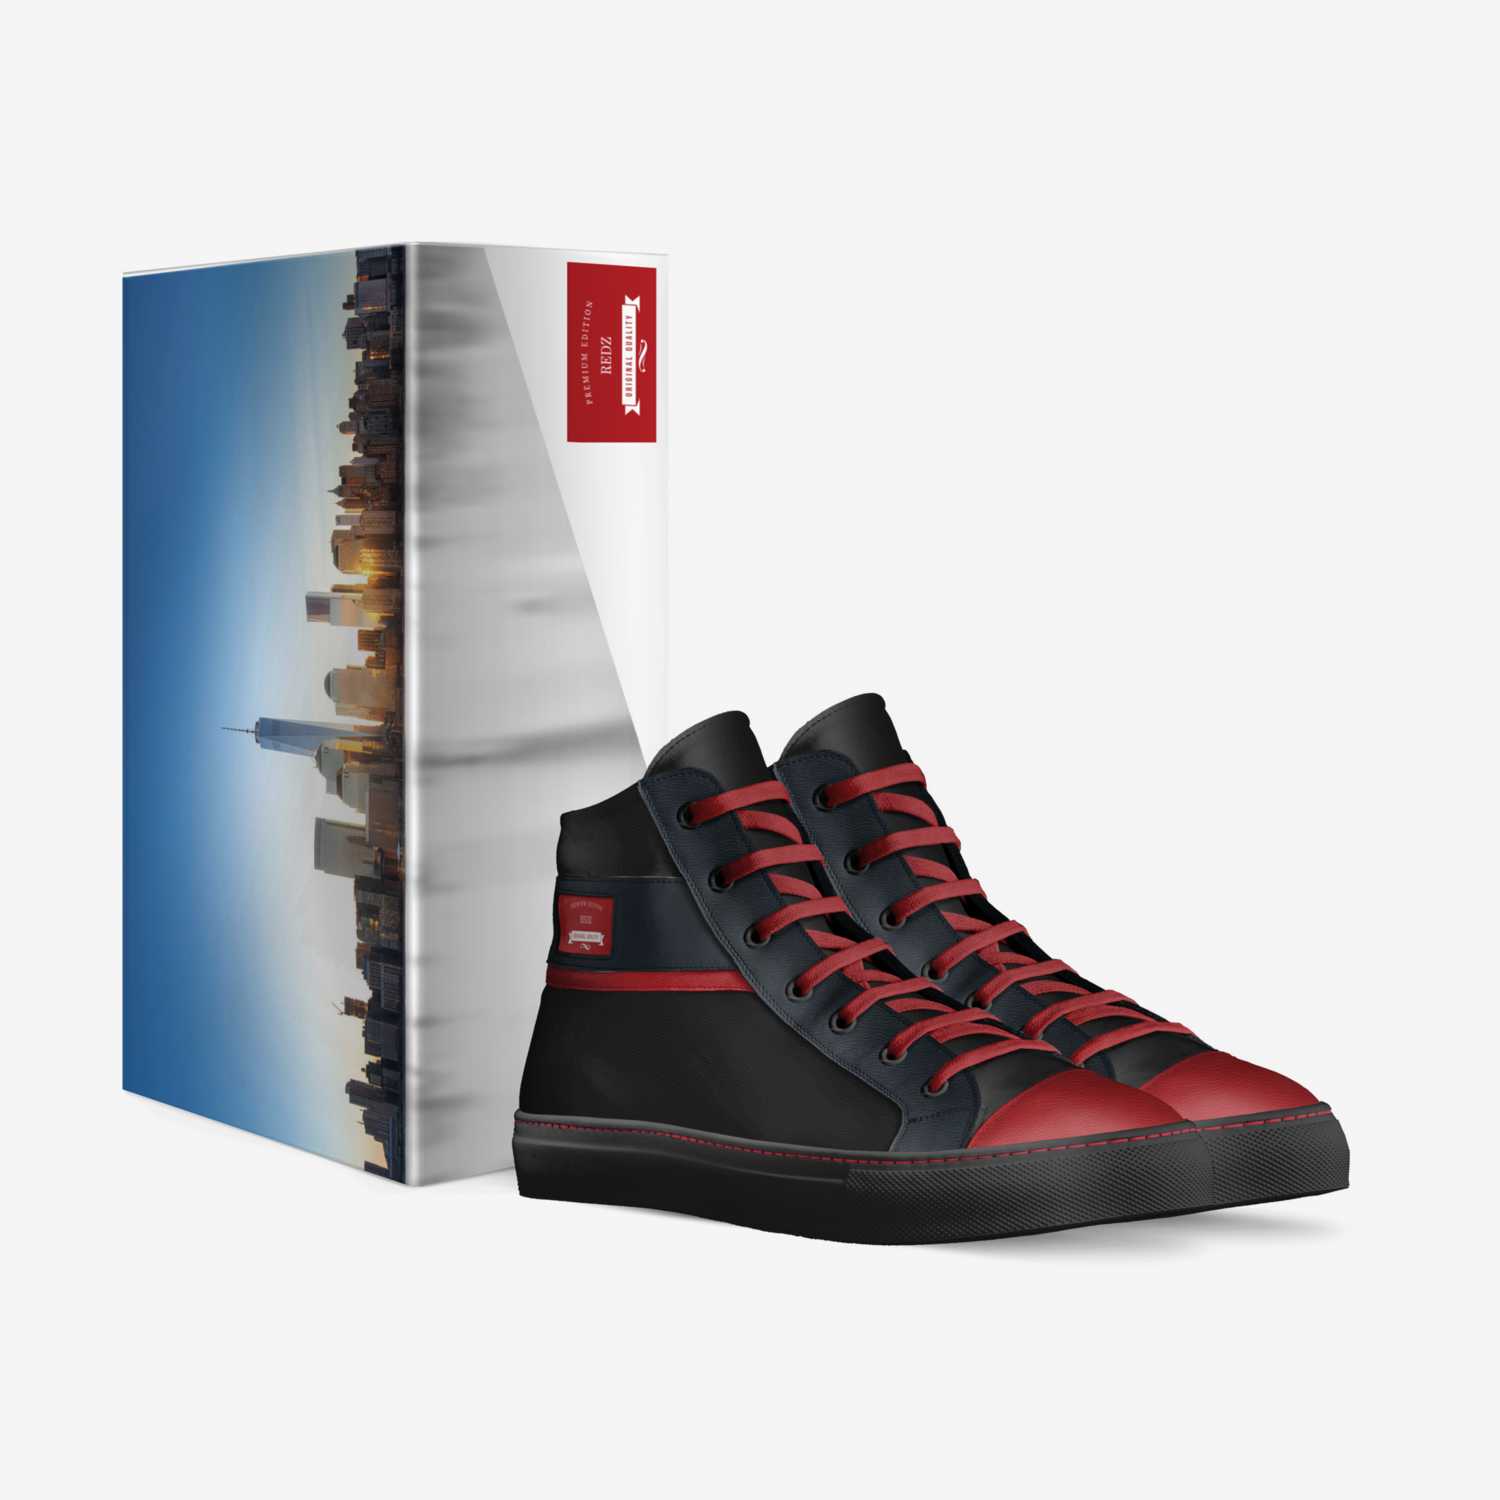 Redz  custom made in Italy shoes by Jacob Wroten | Box view